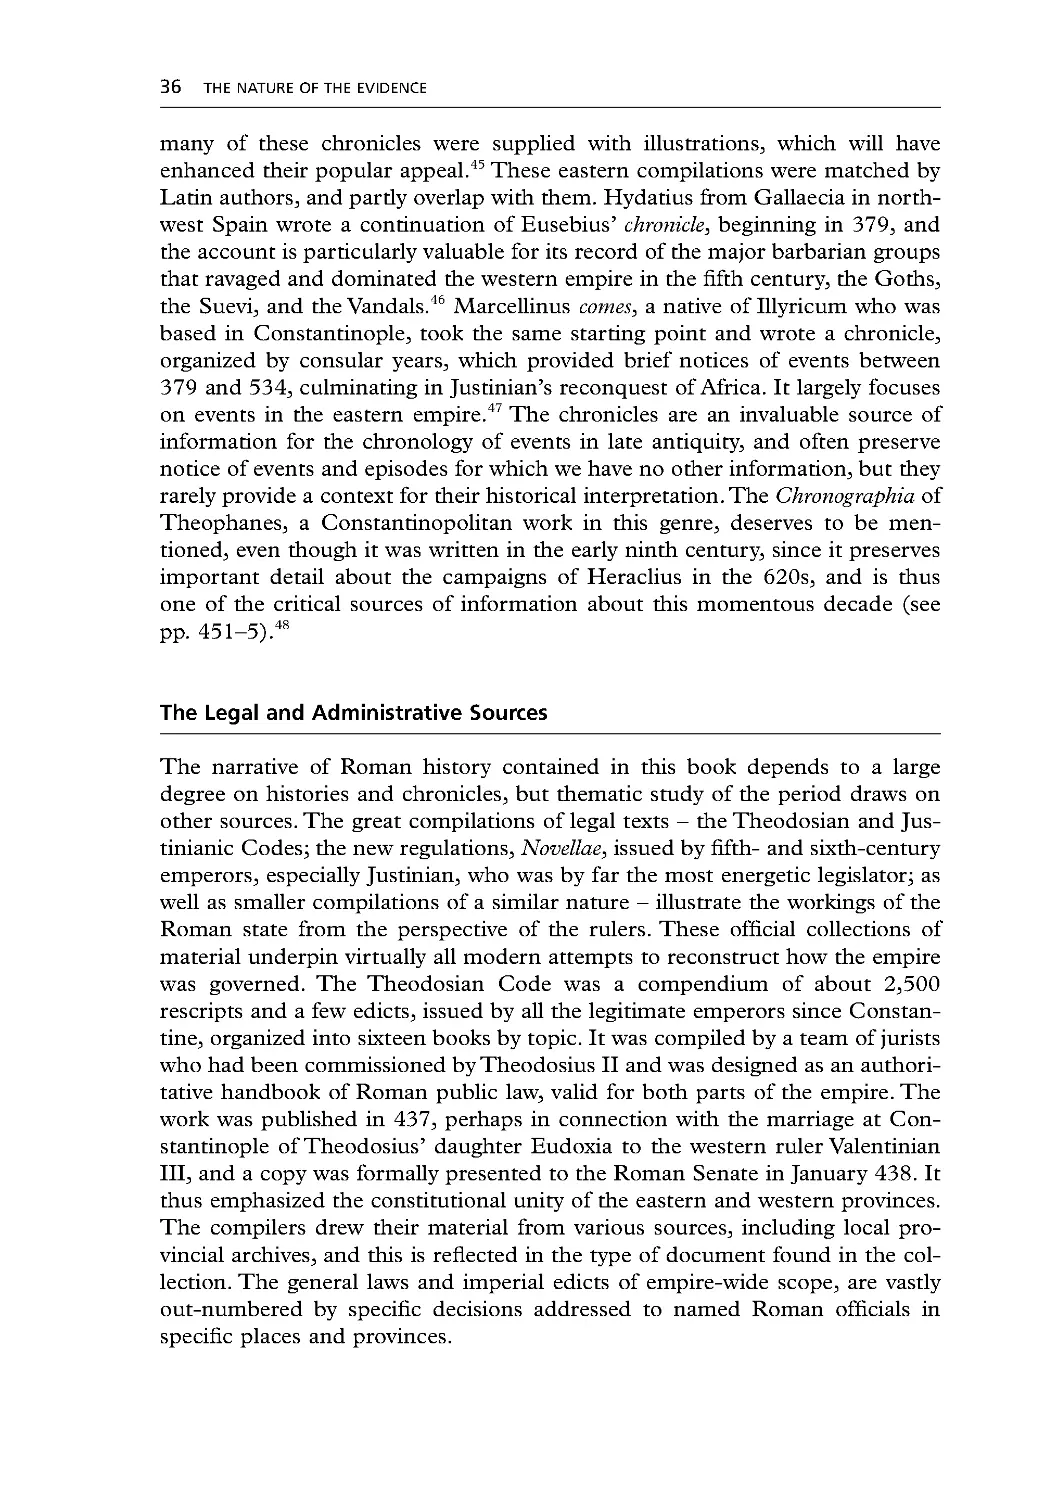 The Legal and Administrative Sources